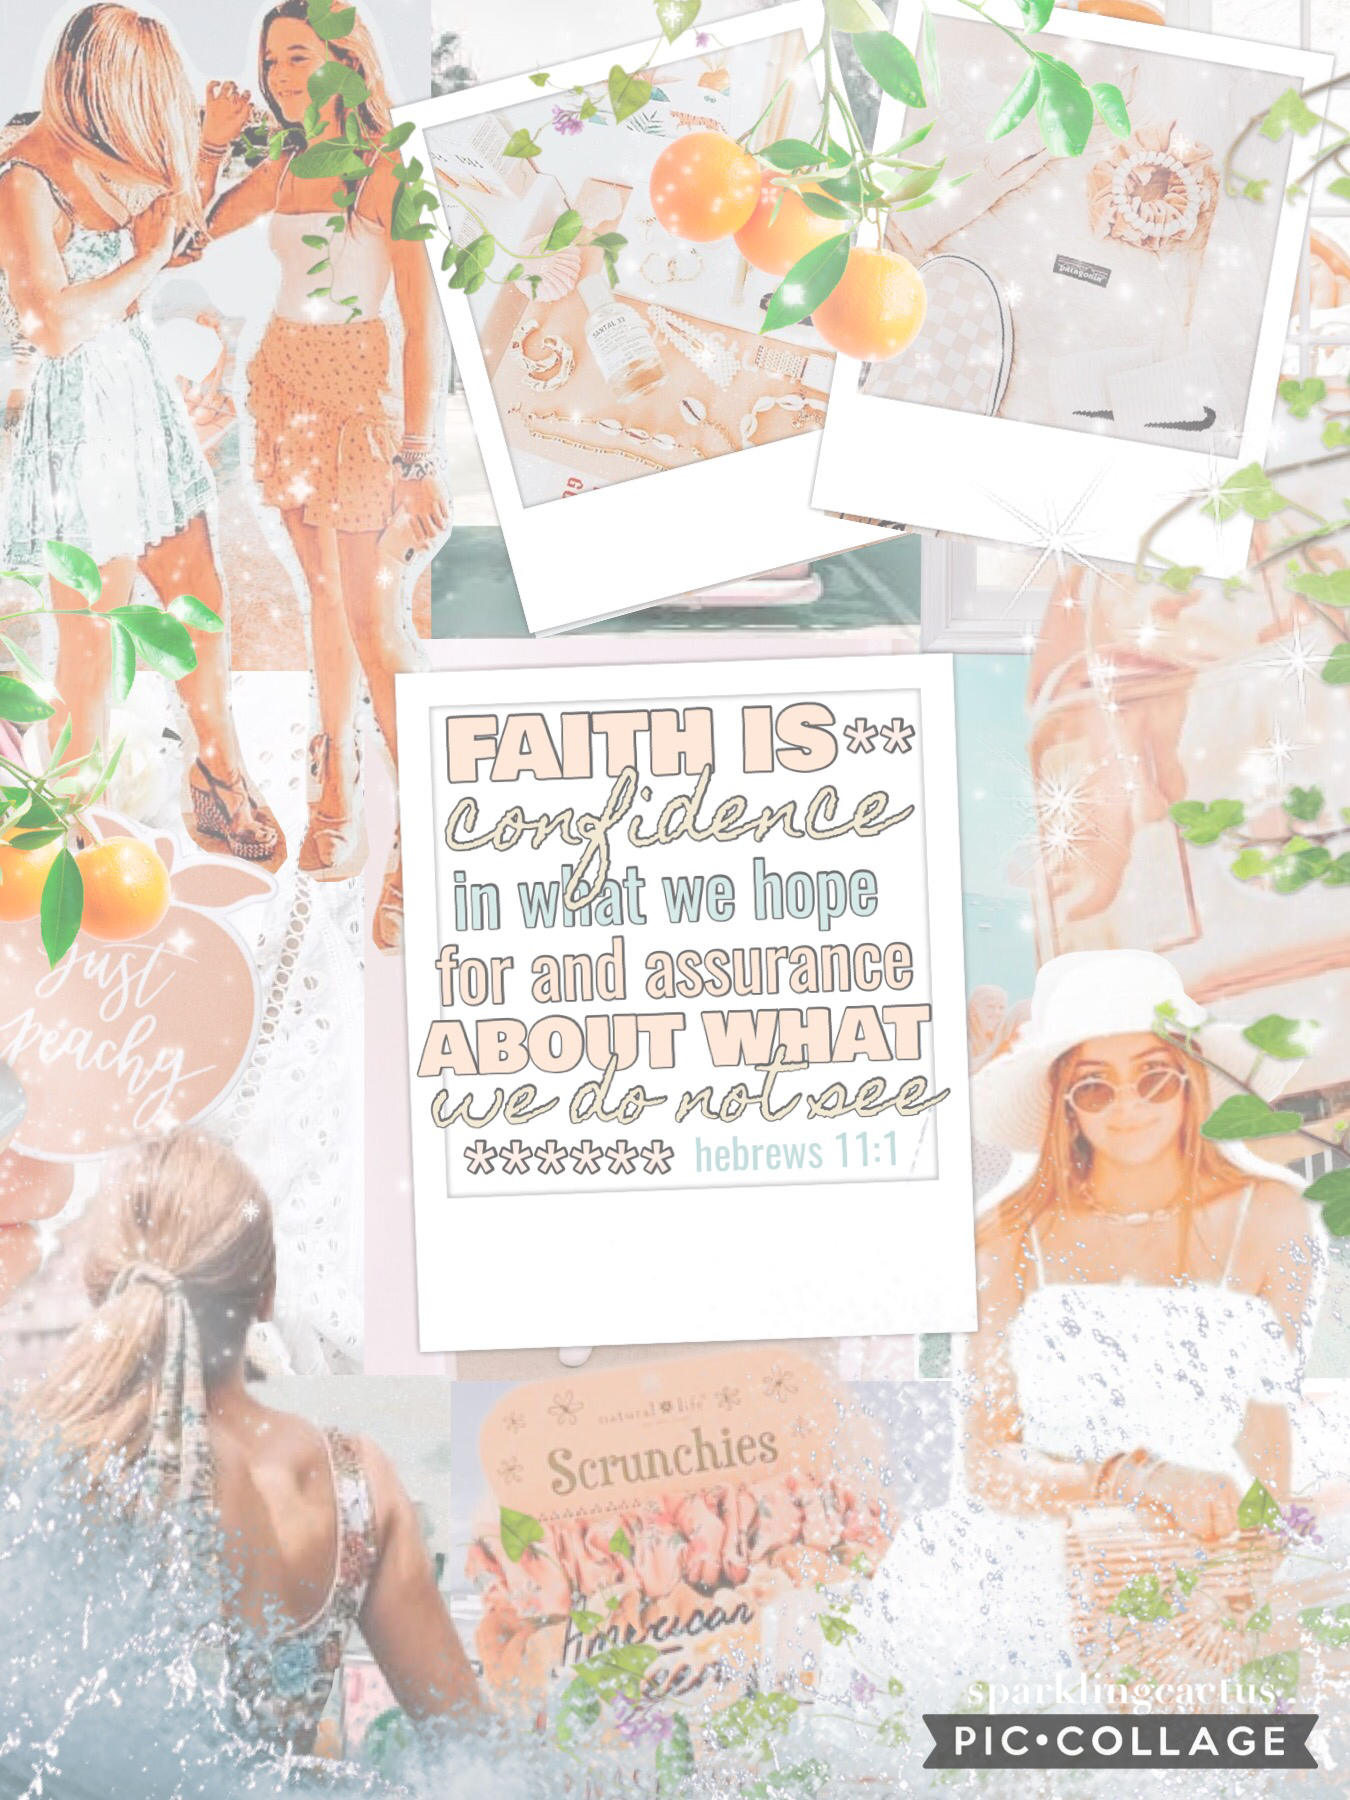 Hi everyone! 🌷this is my attempt to make a more complex collage what do you think? Rate please! Also it’s inspired by @dreaminghappily and @TheBluestSkies please go follow them now! 
For some reason I can still see my collages on this acc!🧐😃😃
Qotd: what a